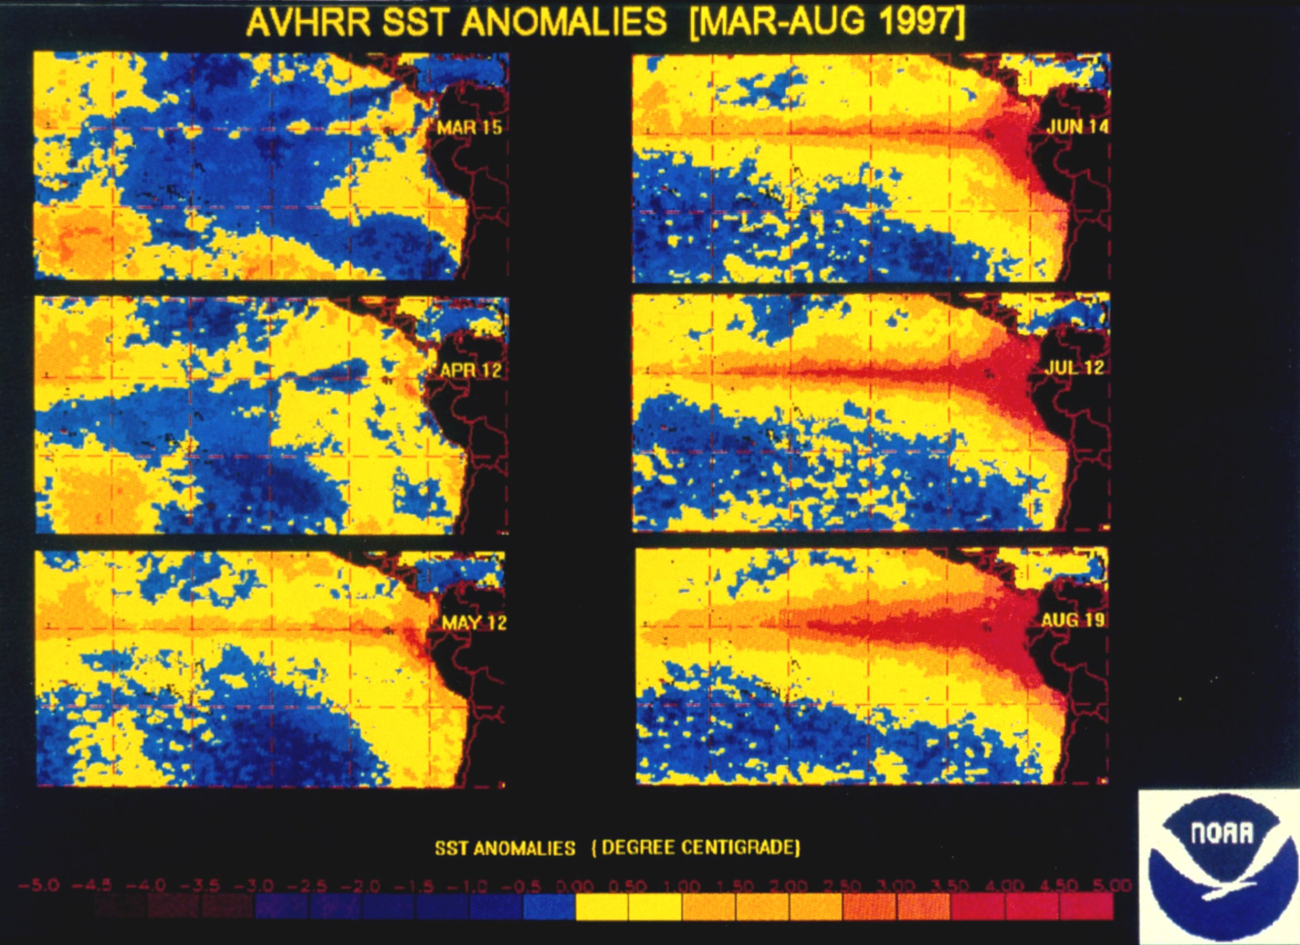 Sea surface temperature anomalies from March to August 1997showing evolution of major El Nino